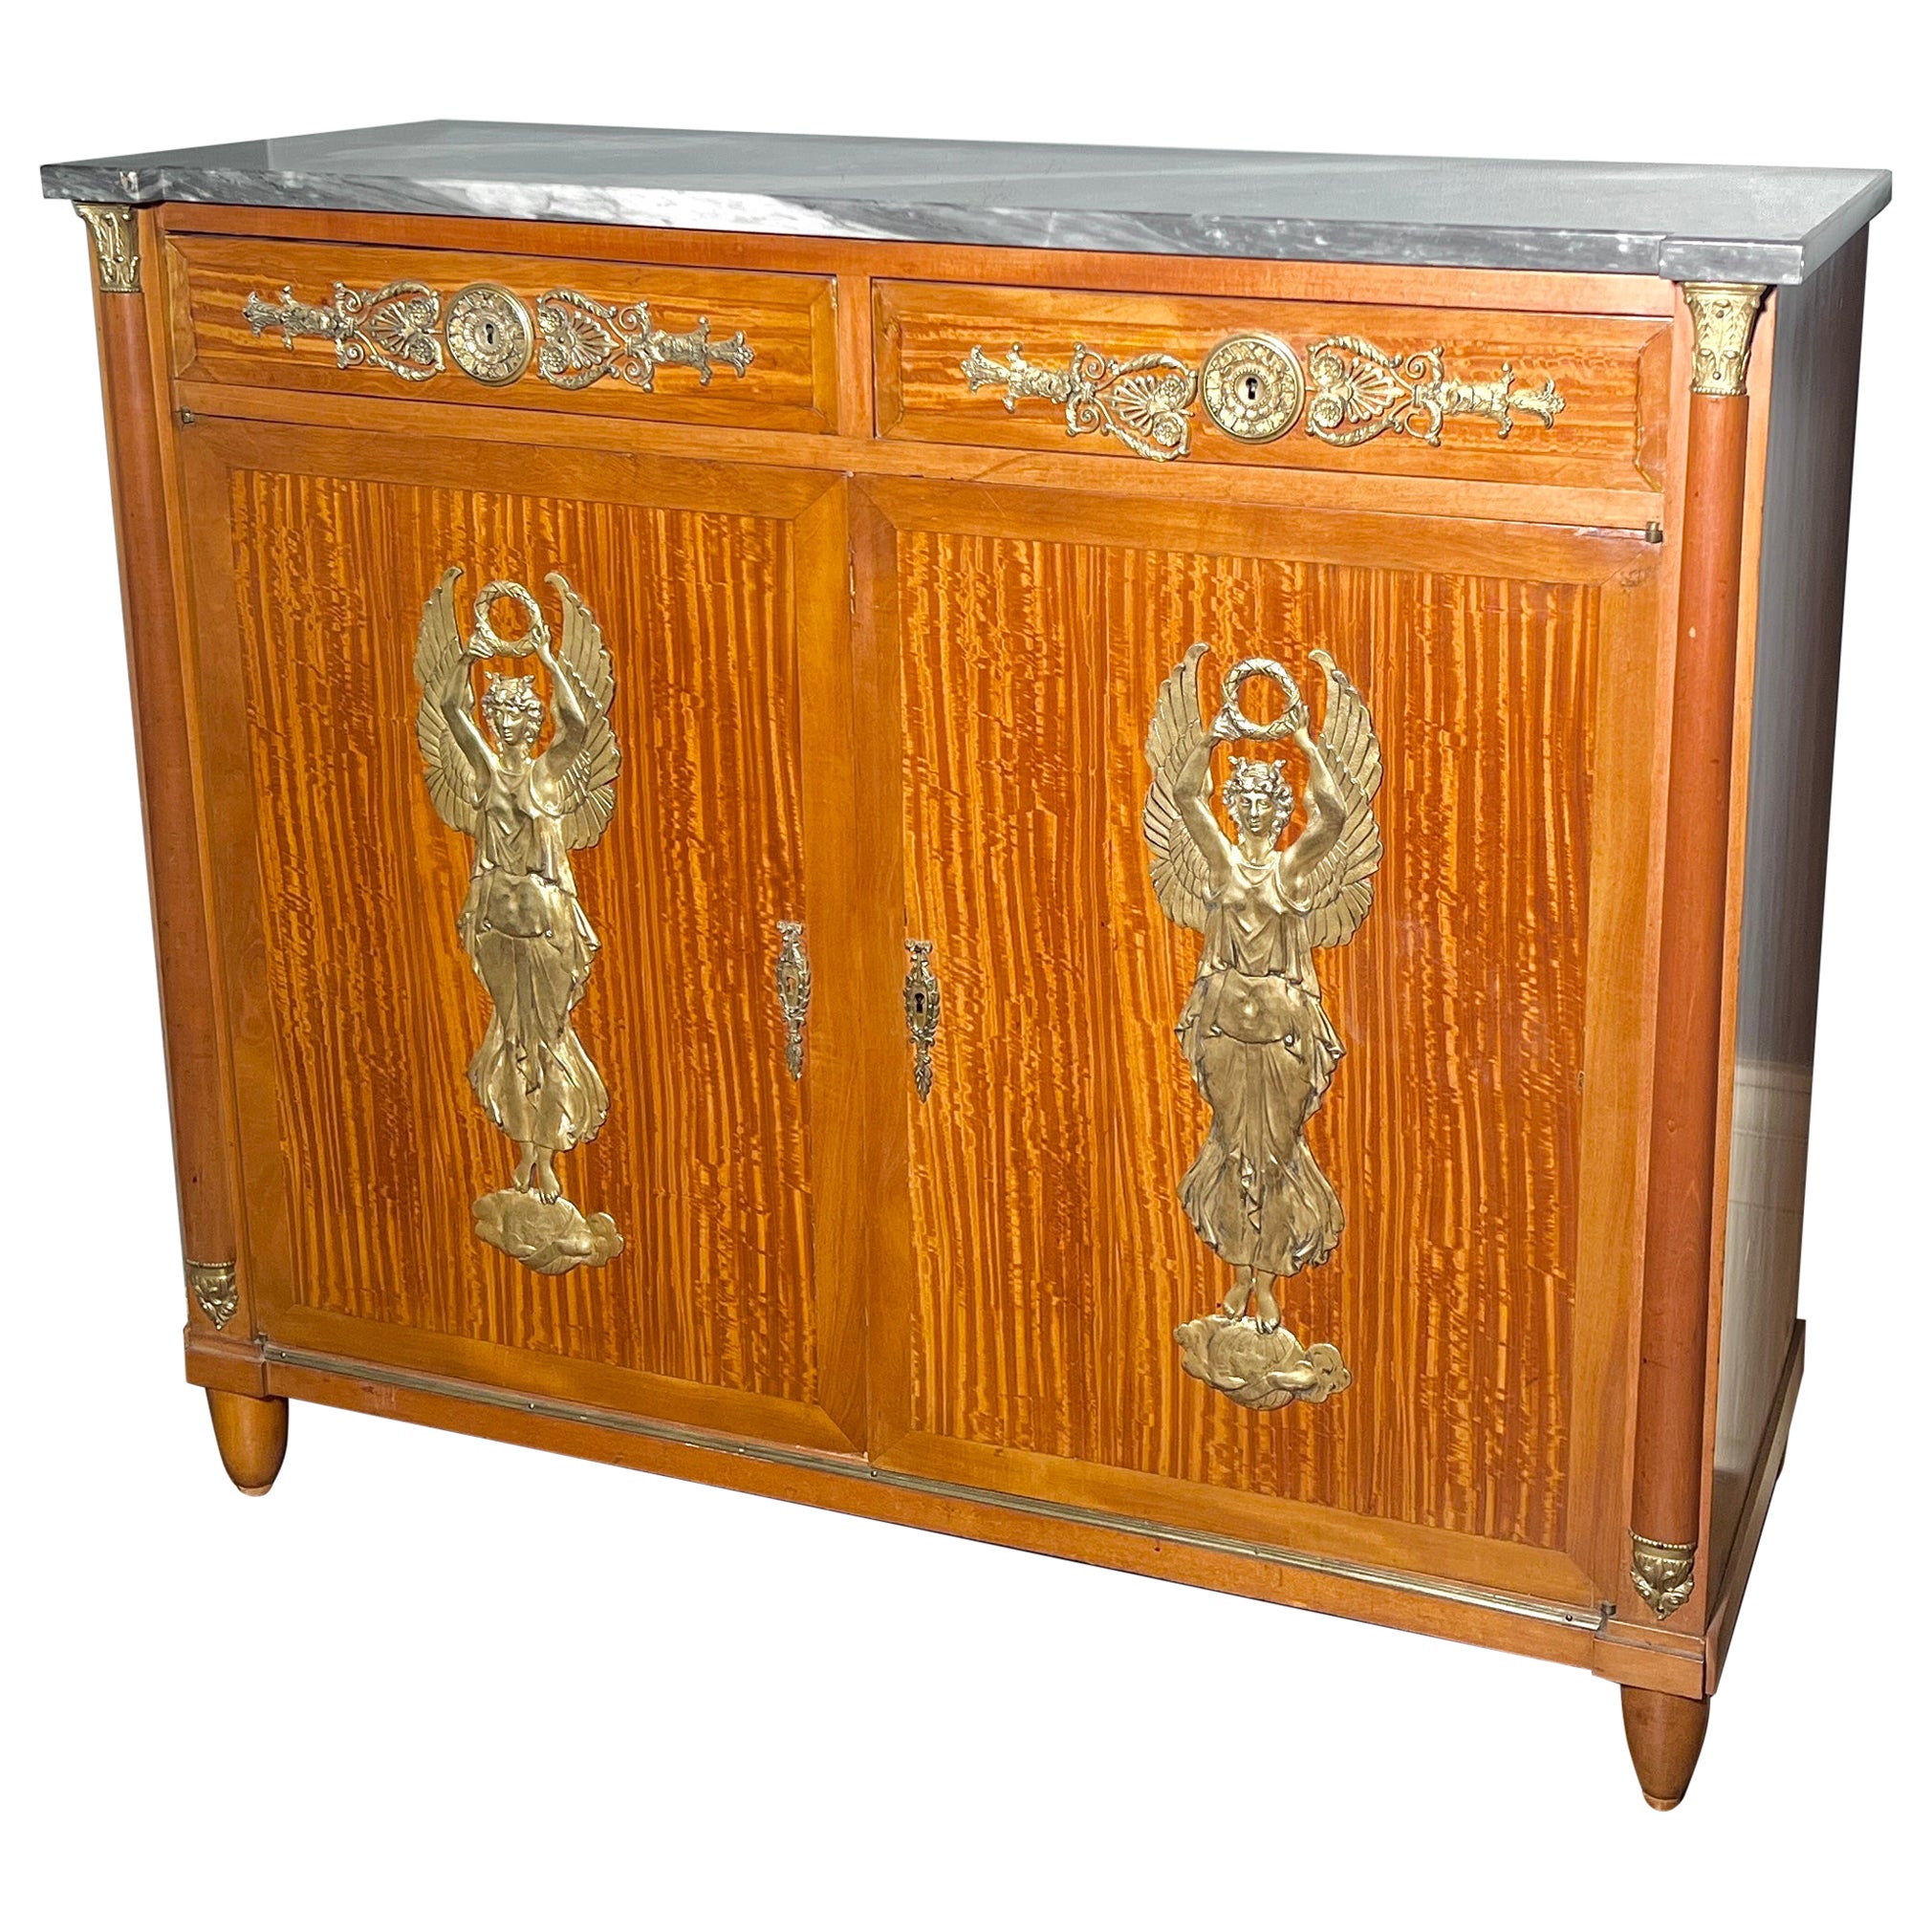 Antique French Empire Ormolu Mounted Marble Top Satinwood Cabinet, Circa 1890.